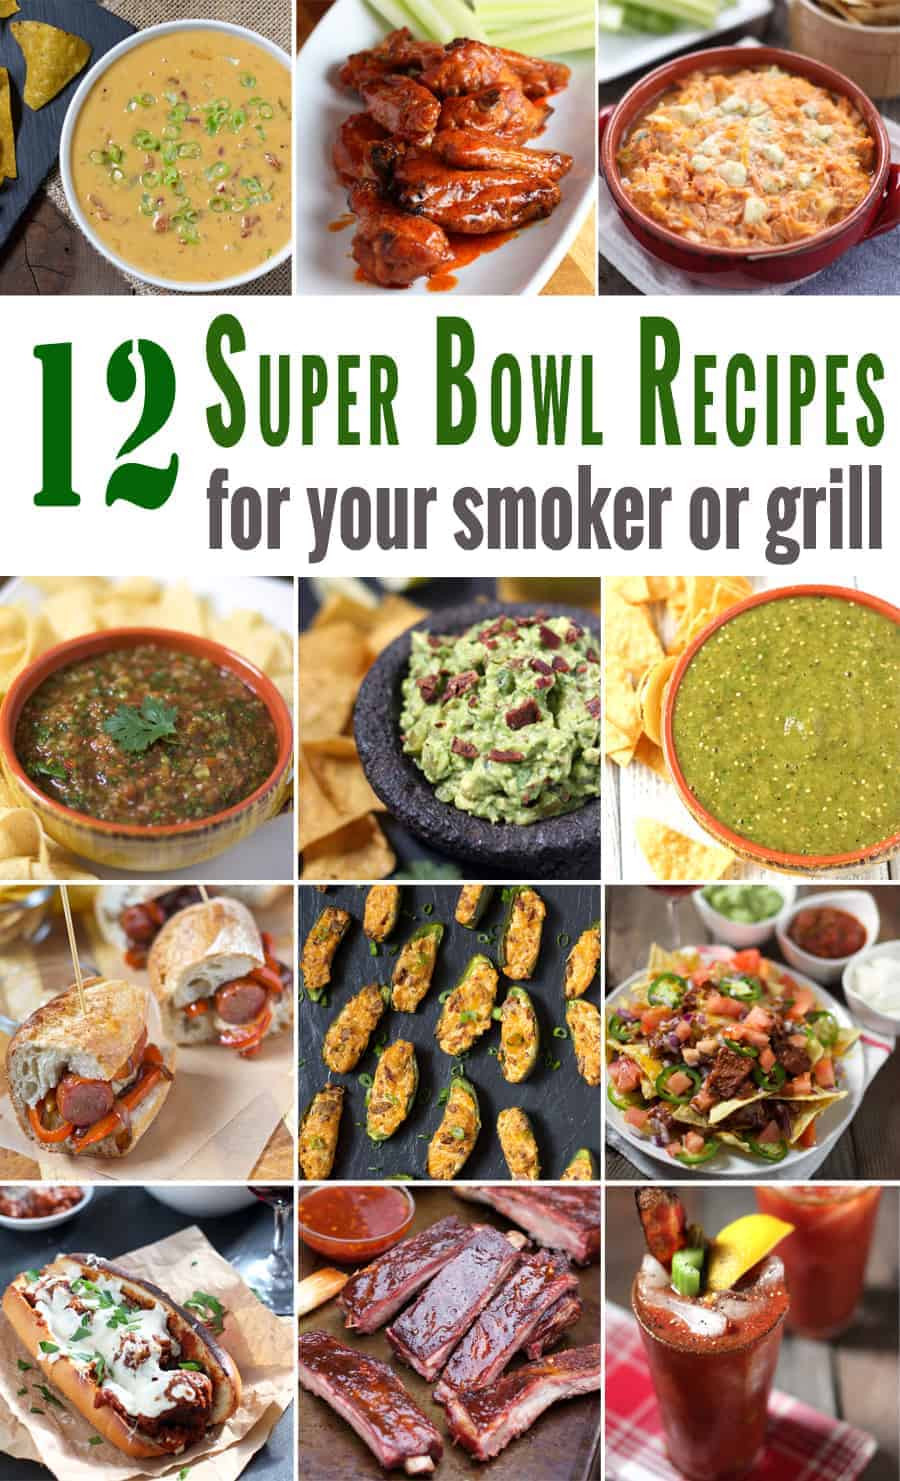 Awesome Super Bowl Recipes
 12 Super Bowl Recipes on the Smoker or Grill Vindulge